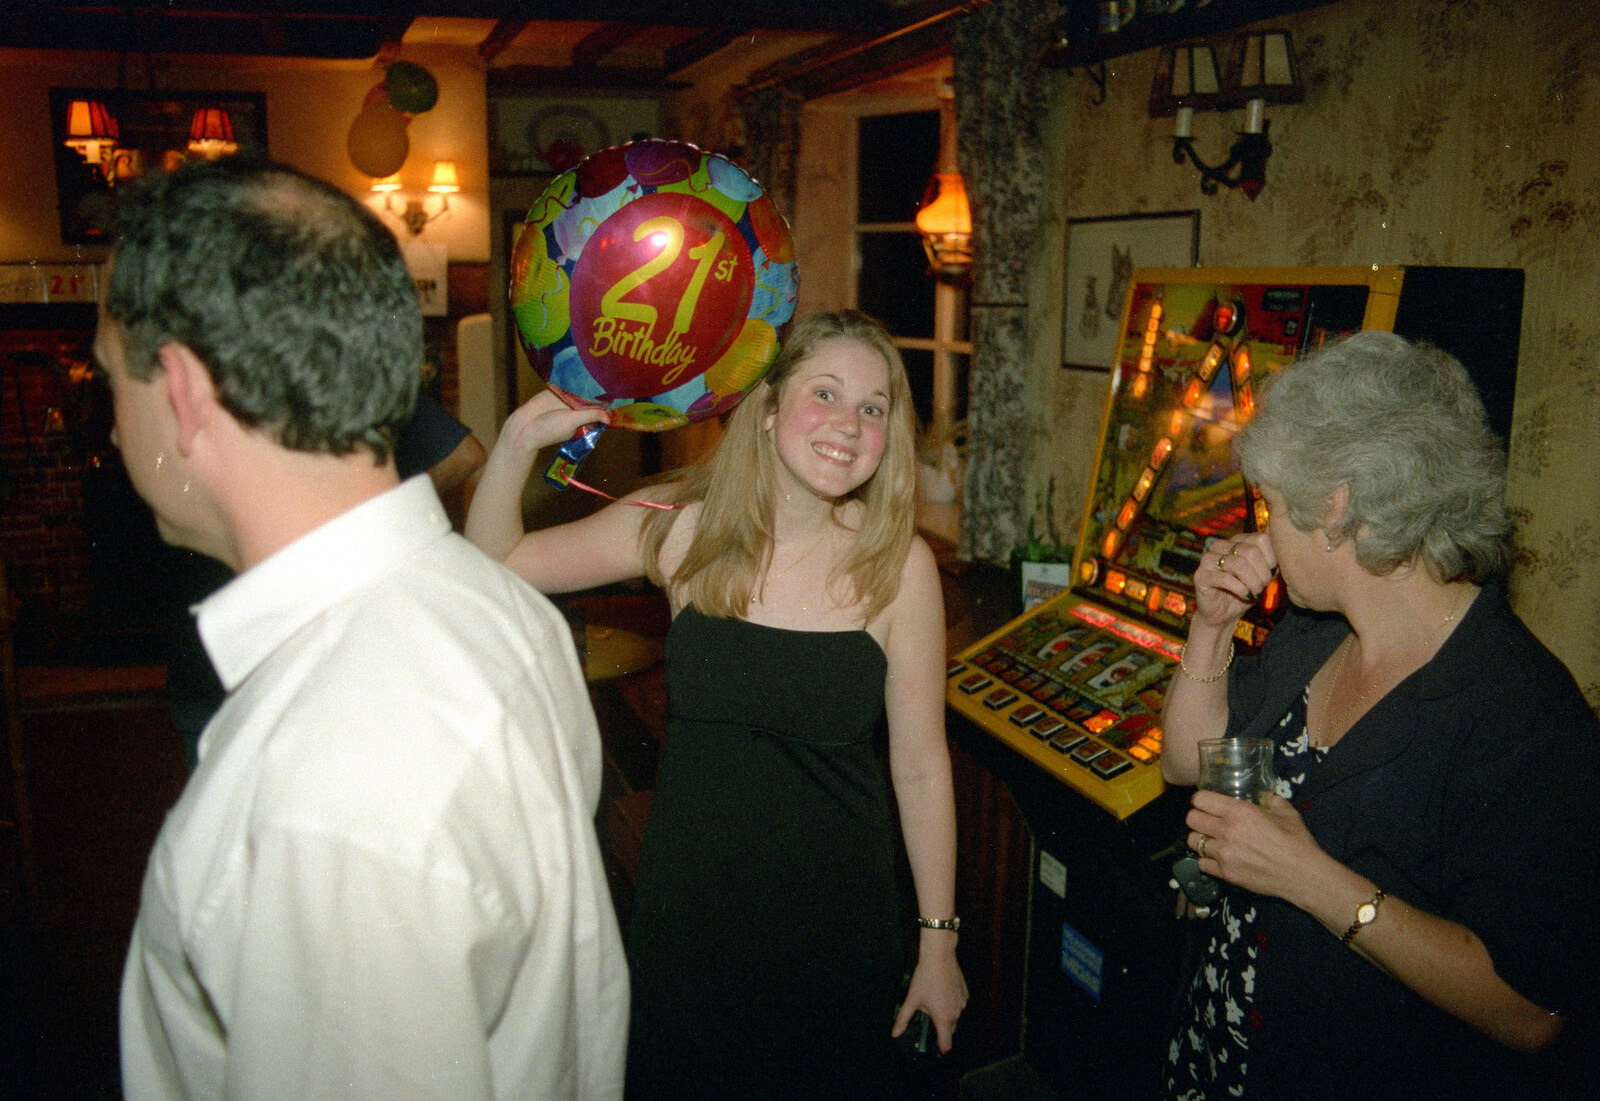 Lorraine takes her balloon for a tour of the pub from Lorraine's 21st Birthday, The Swan, Suffolk - 10th June 2000